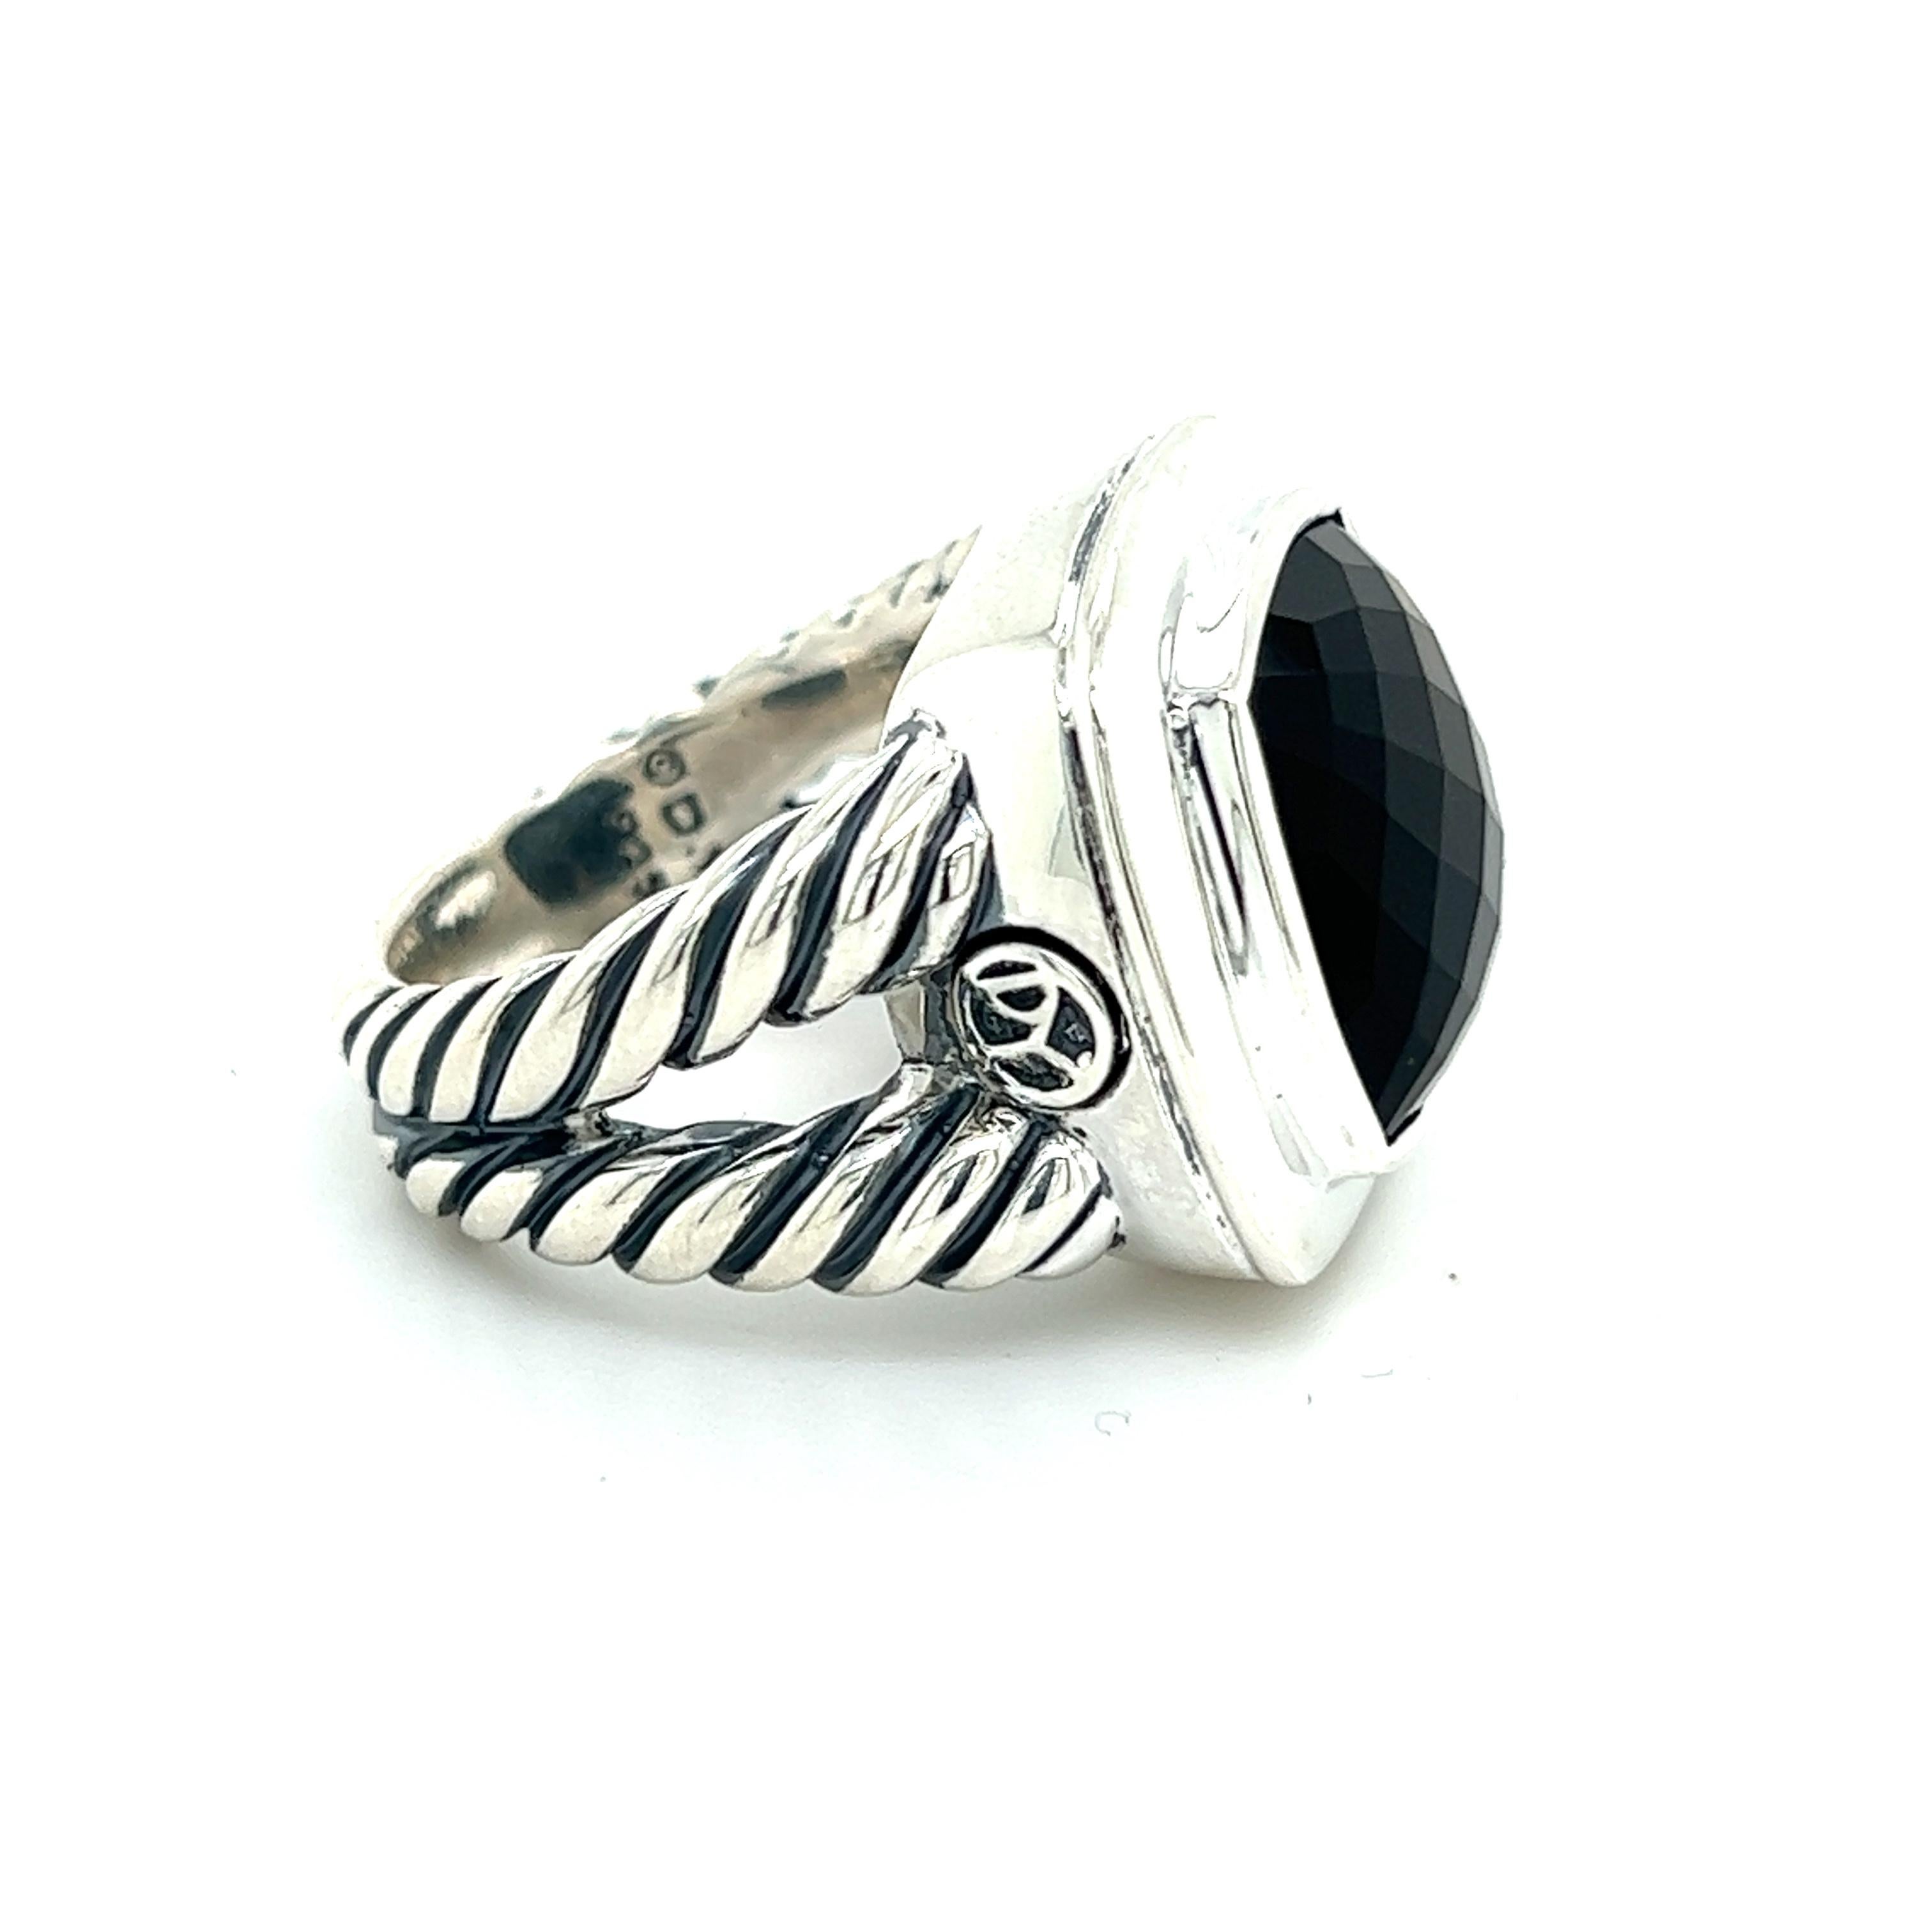 Authentic David Yurman Estate Black Onyx Albion Ring 6 Silver DY248

Retail: $790

Ring from ALBION COLLECTION

This elegant Authentic David Yurman ring is made of sterling silver.

TRUSTED SELLER SINCE 2002

PLEASE SEE OUR HUNDREDS OF POSITIVE